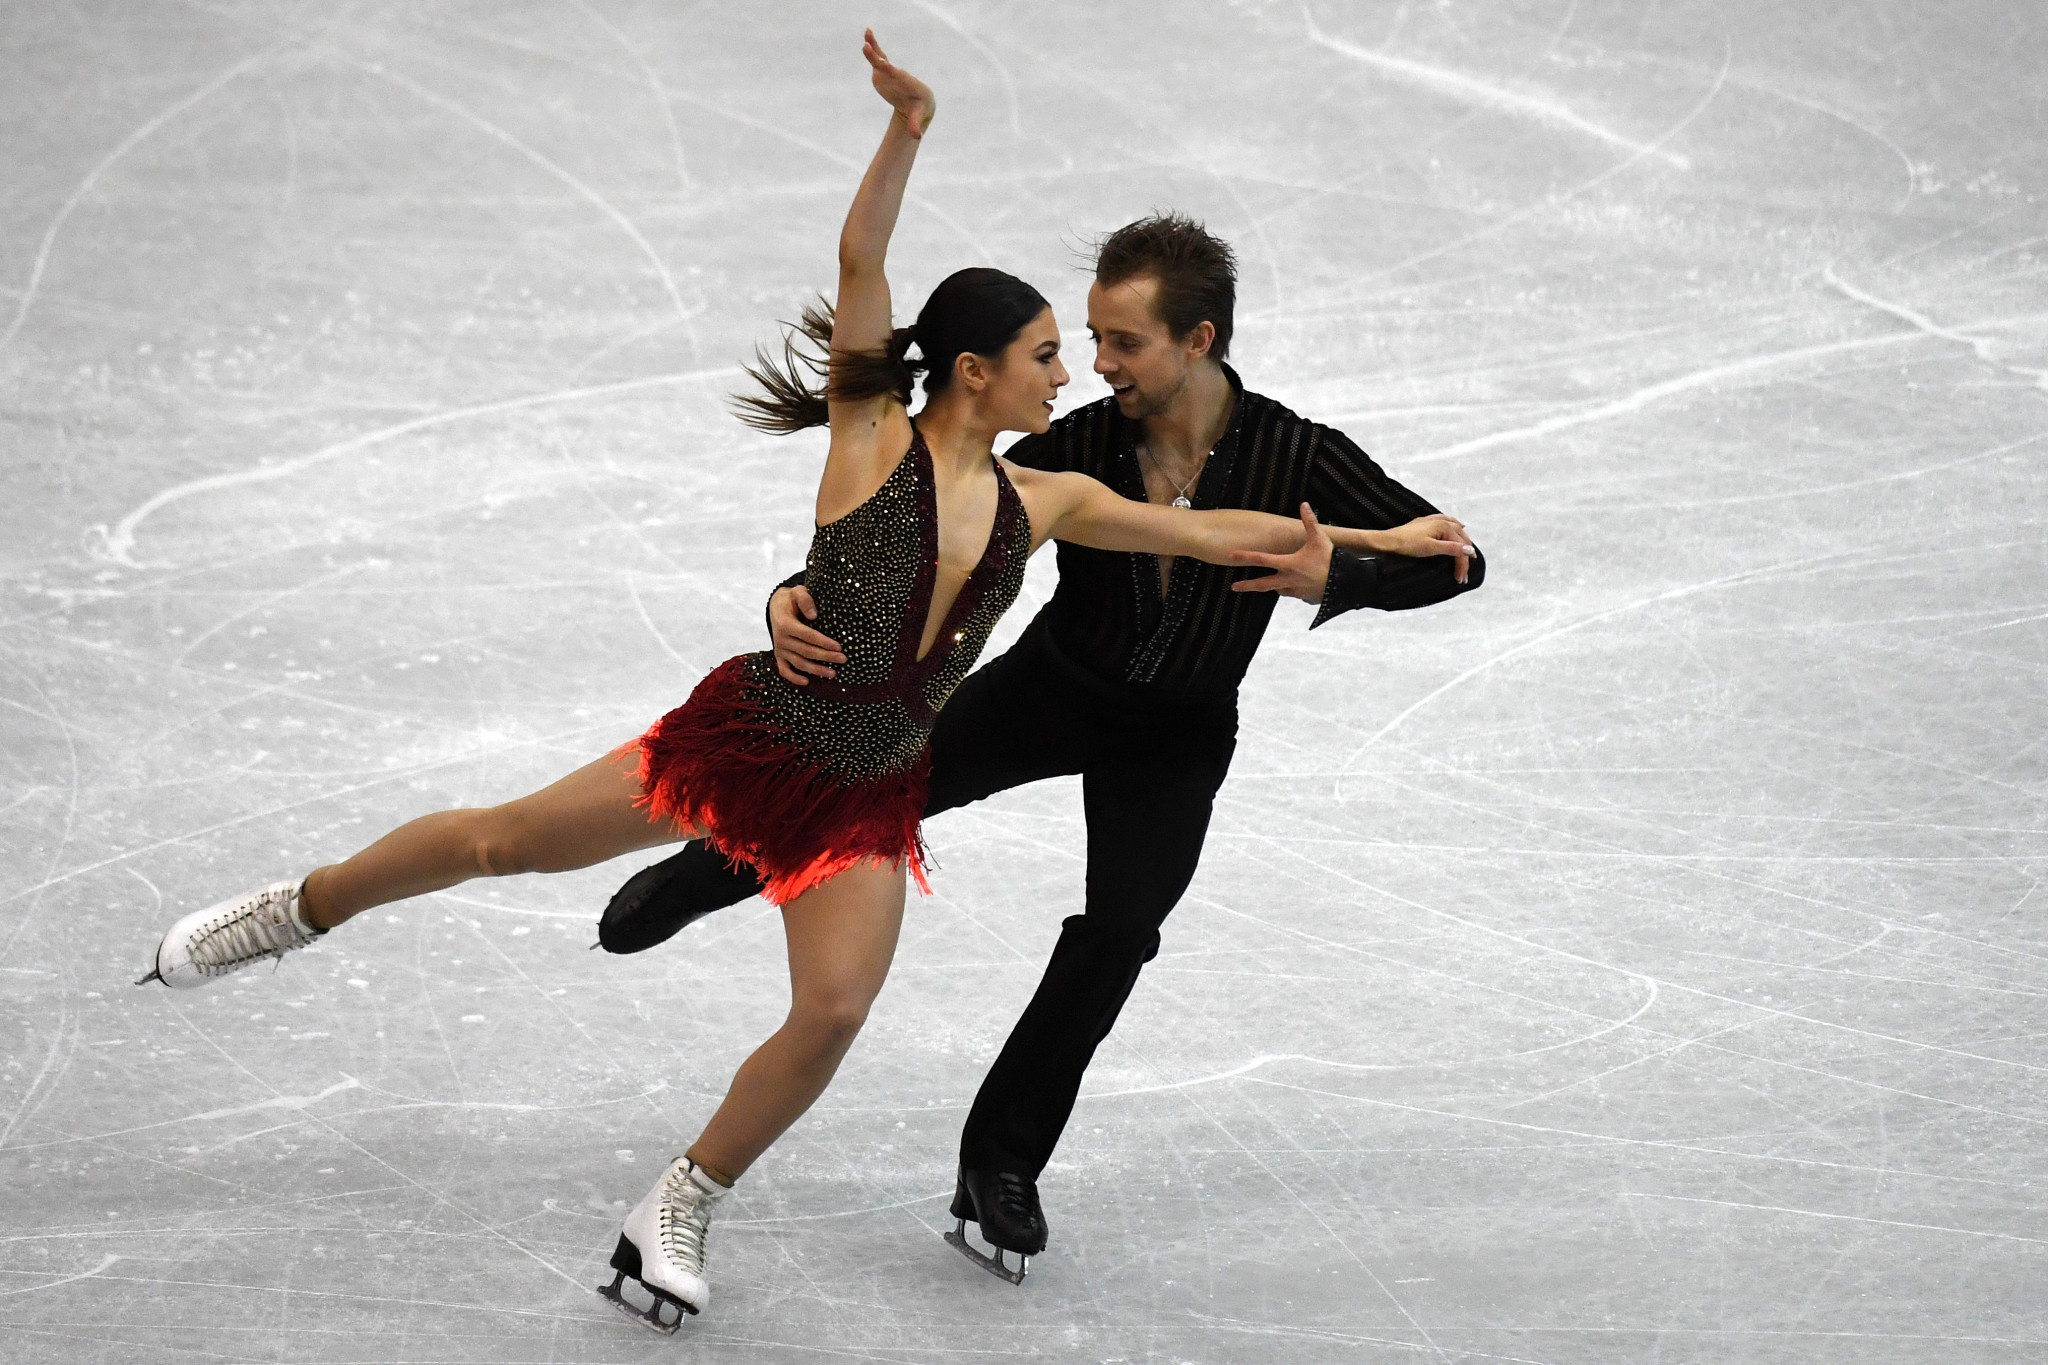 Kaitlin Hawayek and Jean-Luc Baker won today's short dance event ©Getty Images